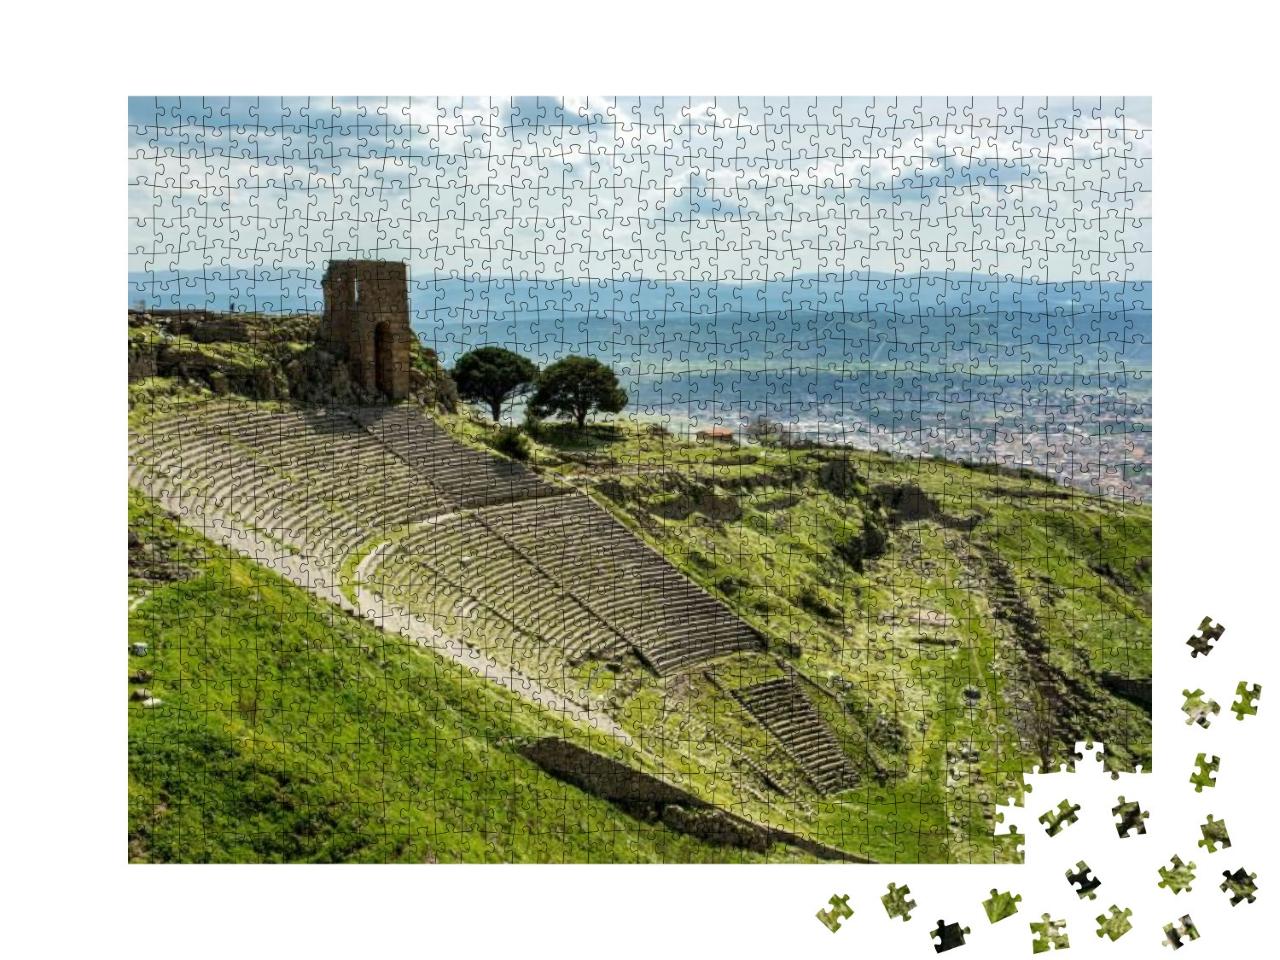 Turkey Pergamon Ancient City... Jigsaw Puzzle with 1000 pieces